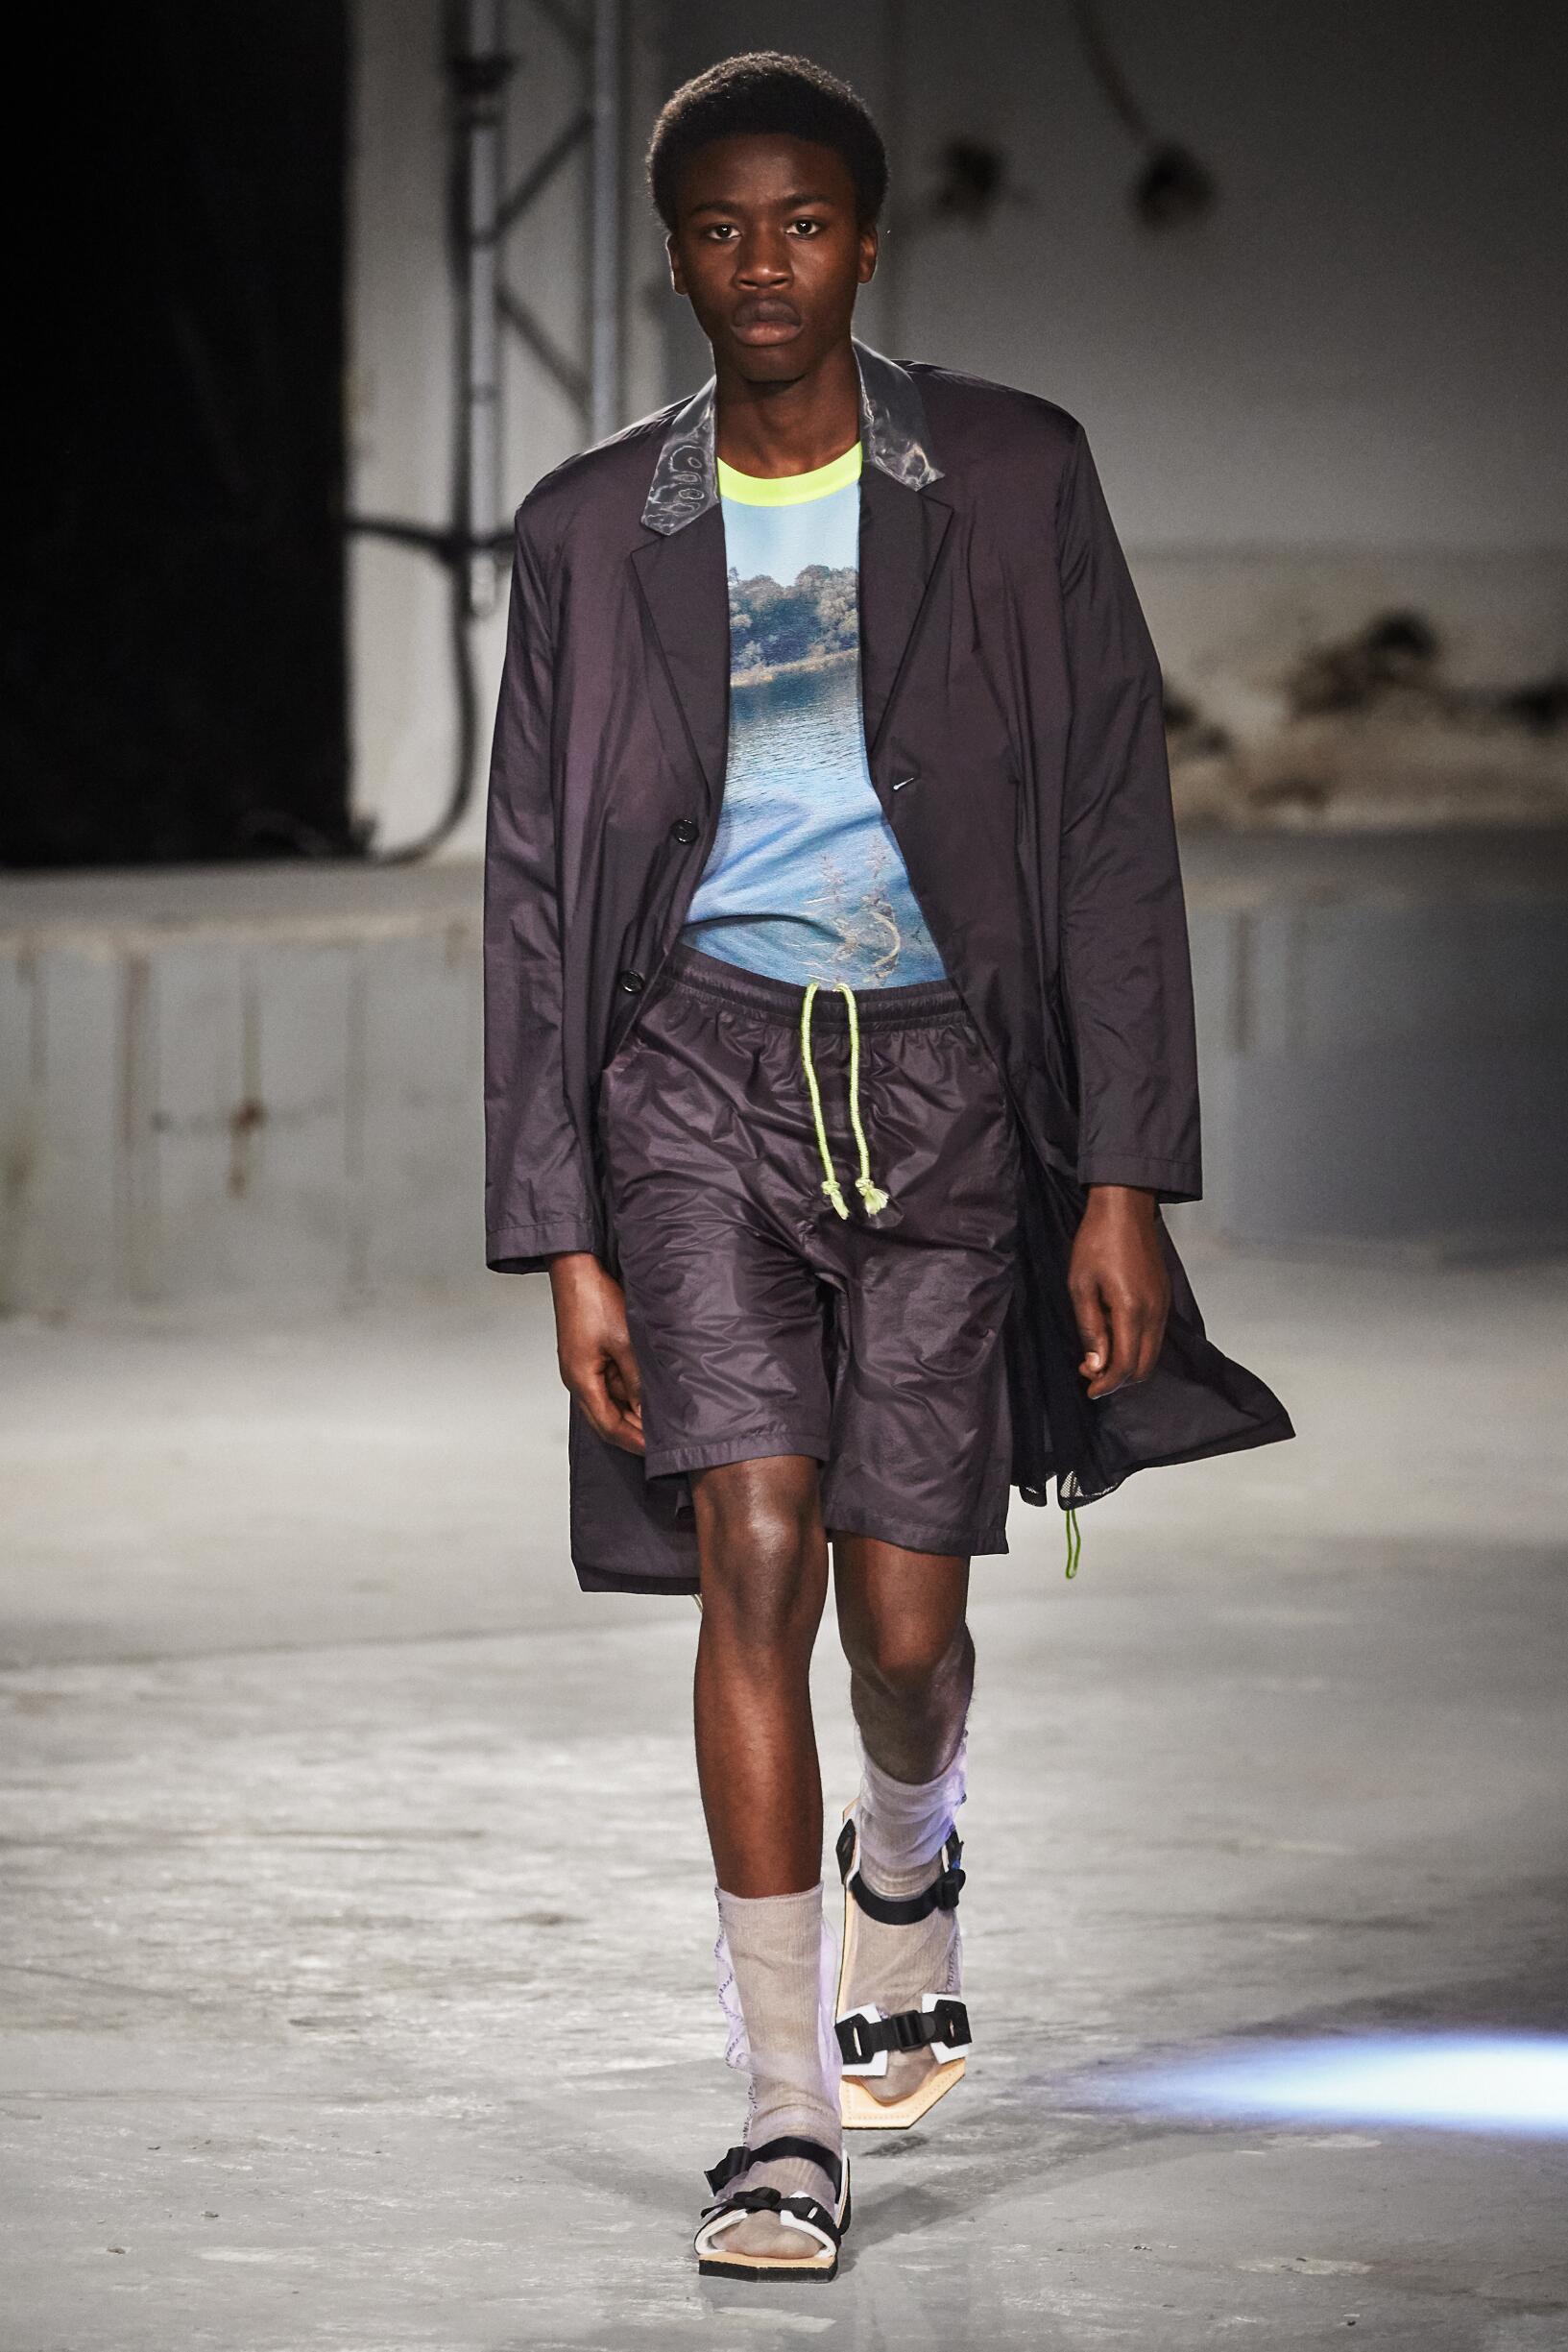 ACNE STUDIOS SPRING SUMMER 2019 MEN’S COLLECTION | The Skinny Beep